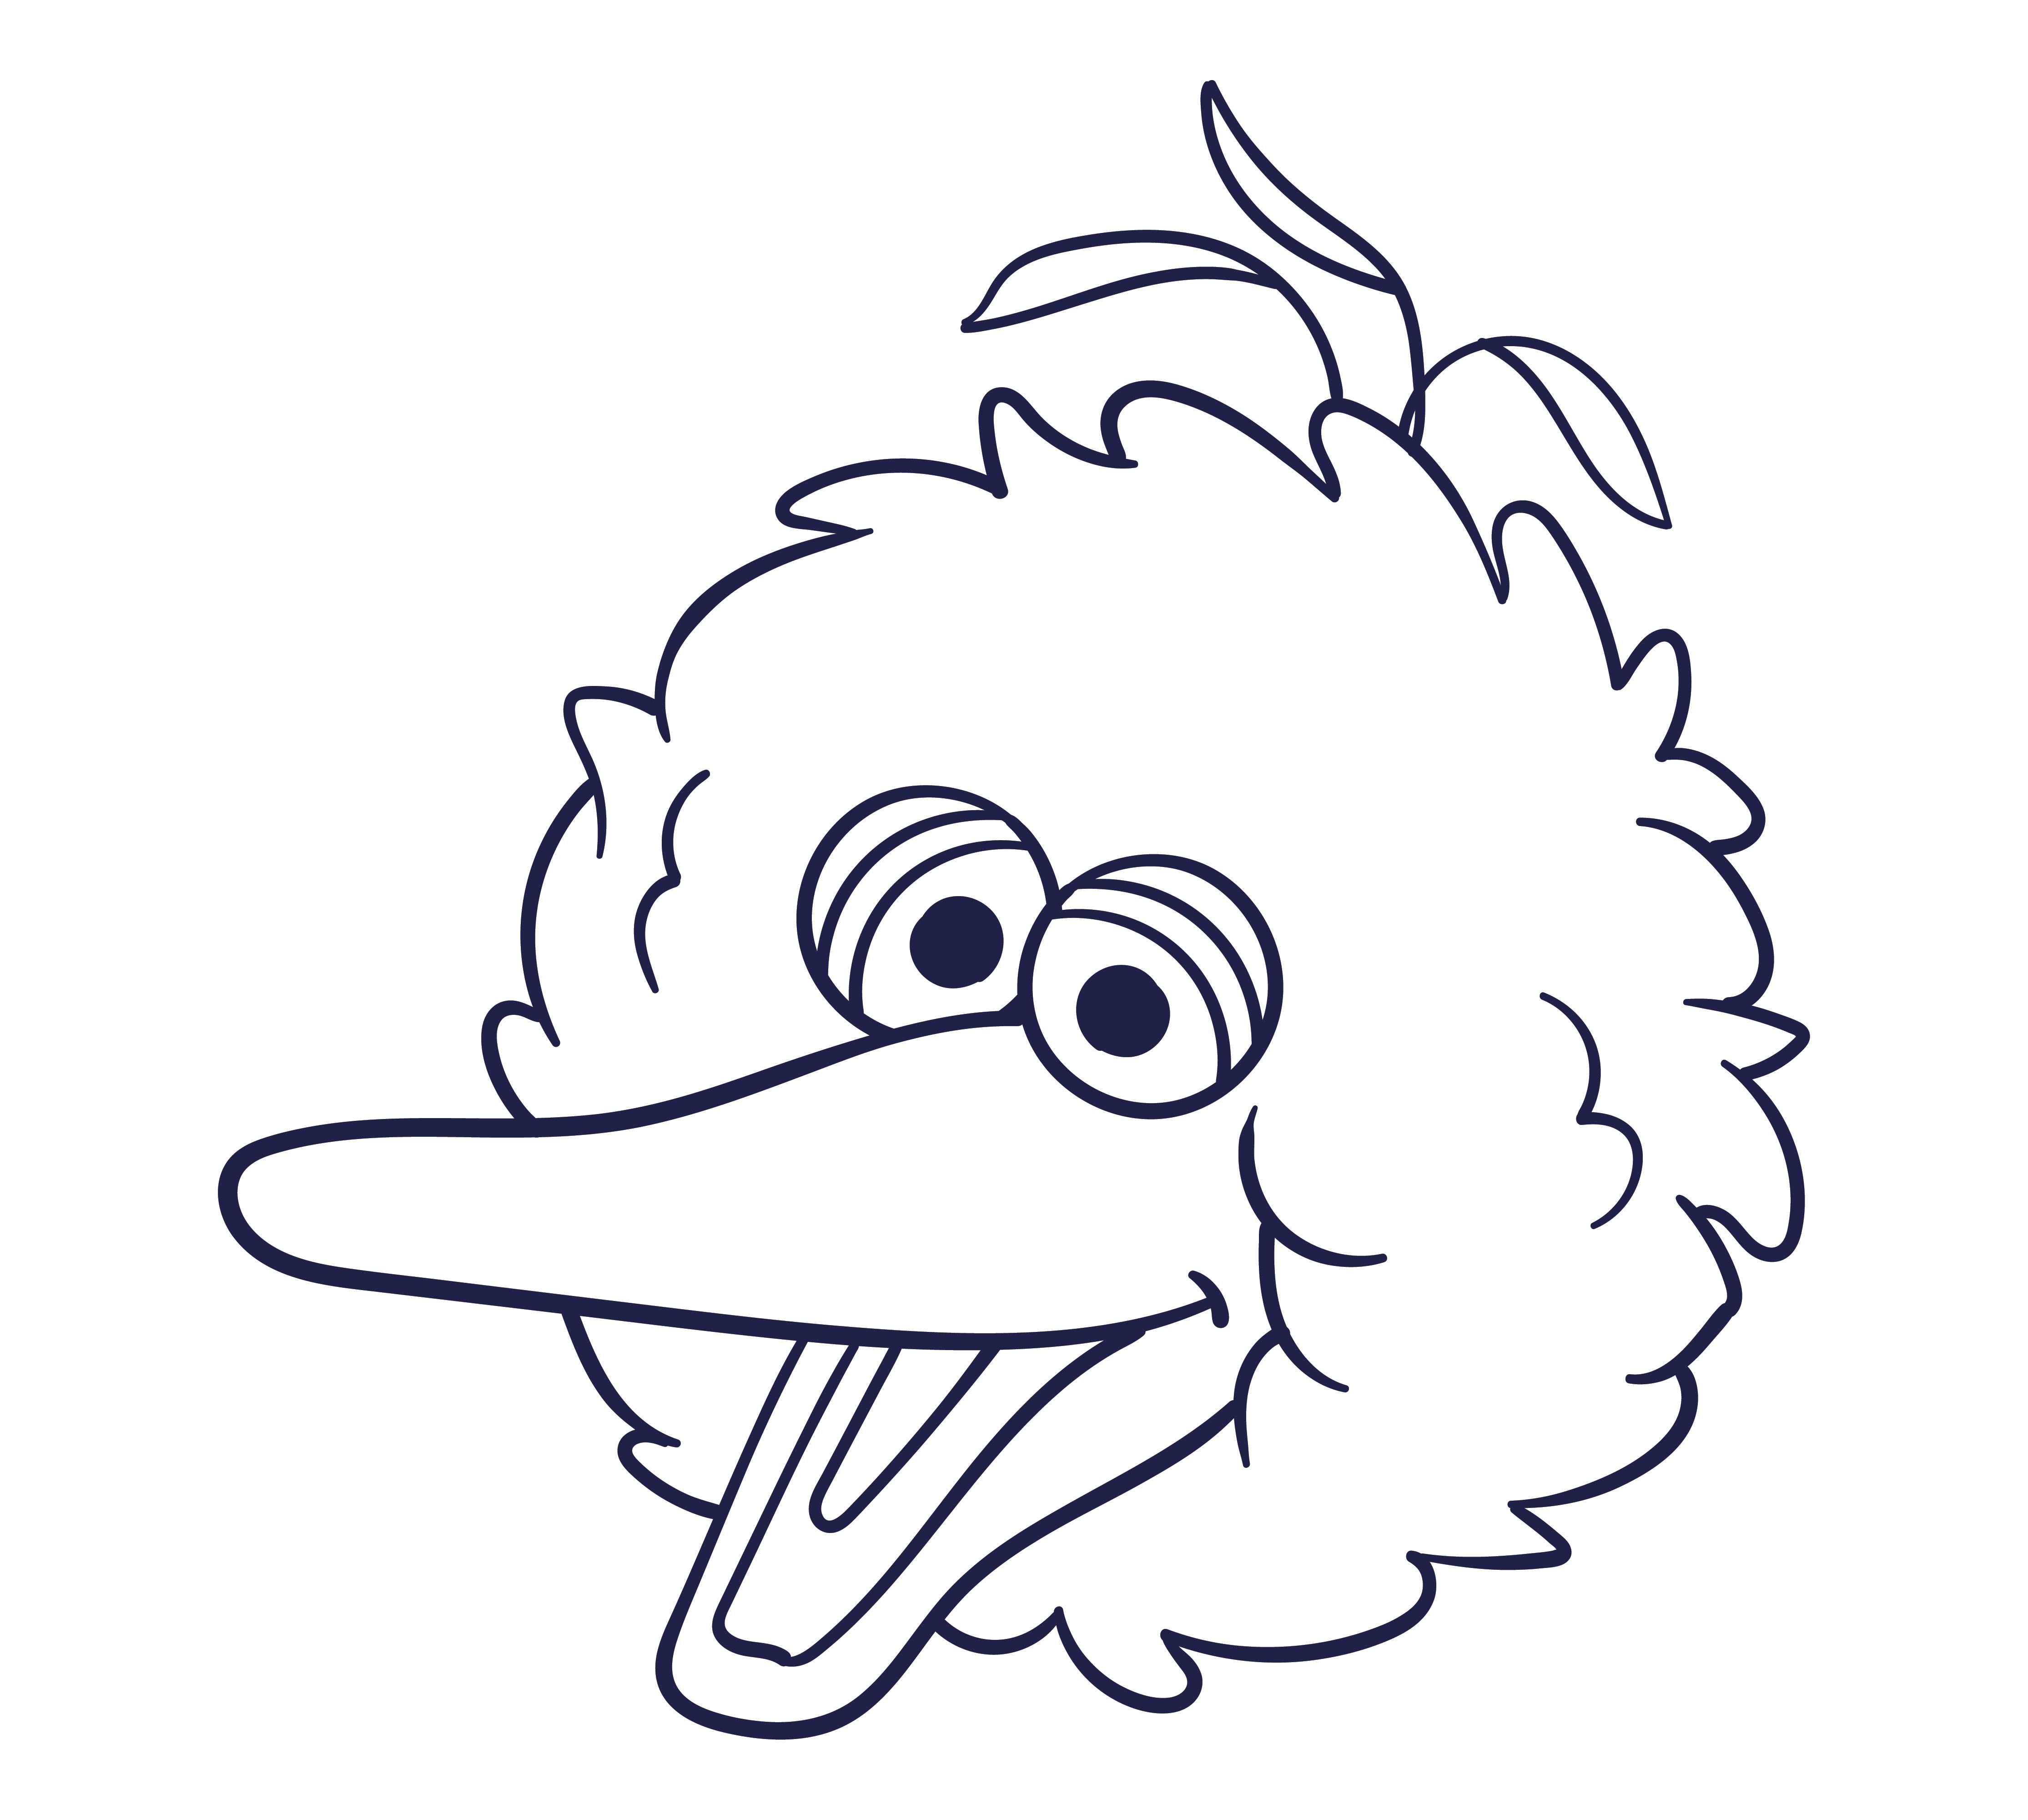 Sesame Street Big Bird Face Template Pictures to Pin on Pinterest